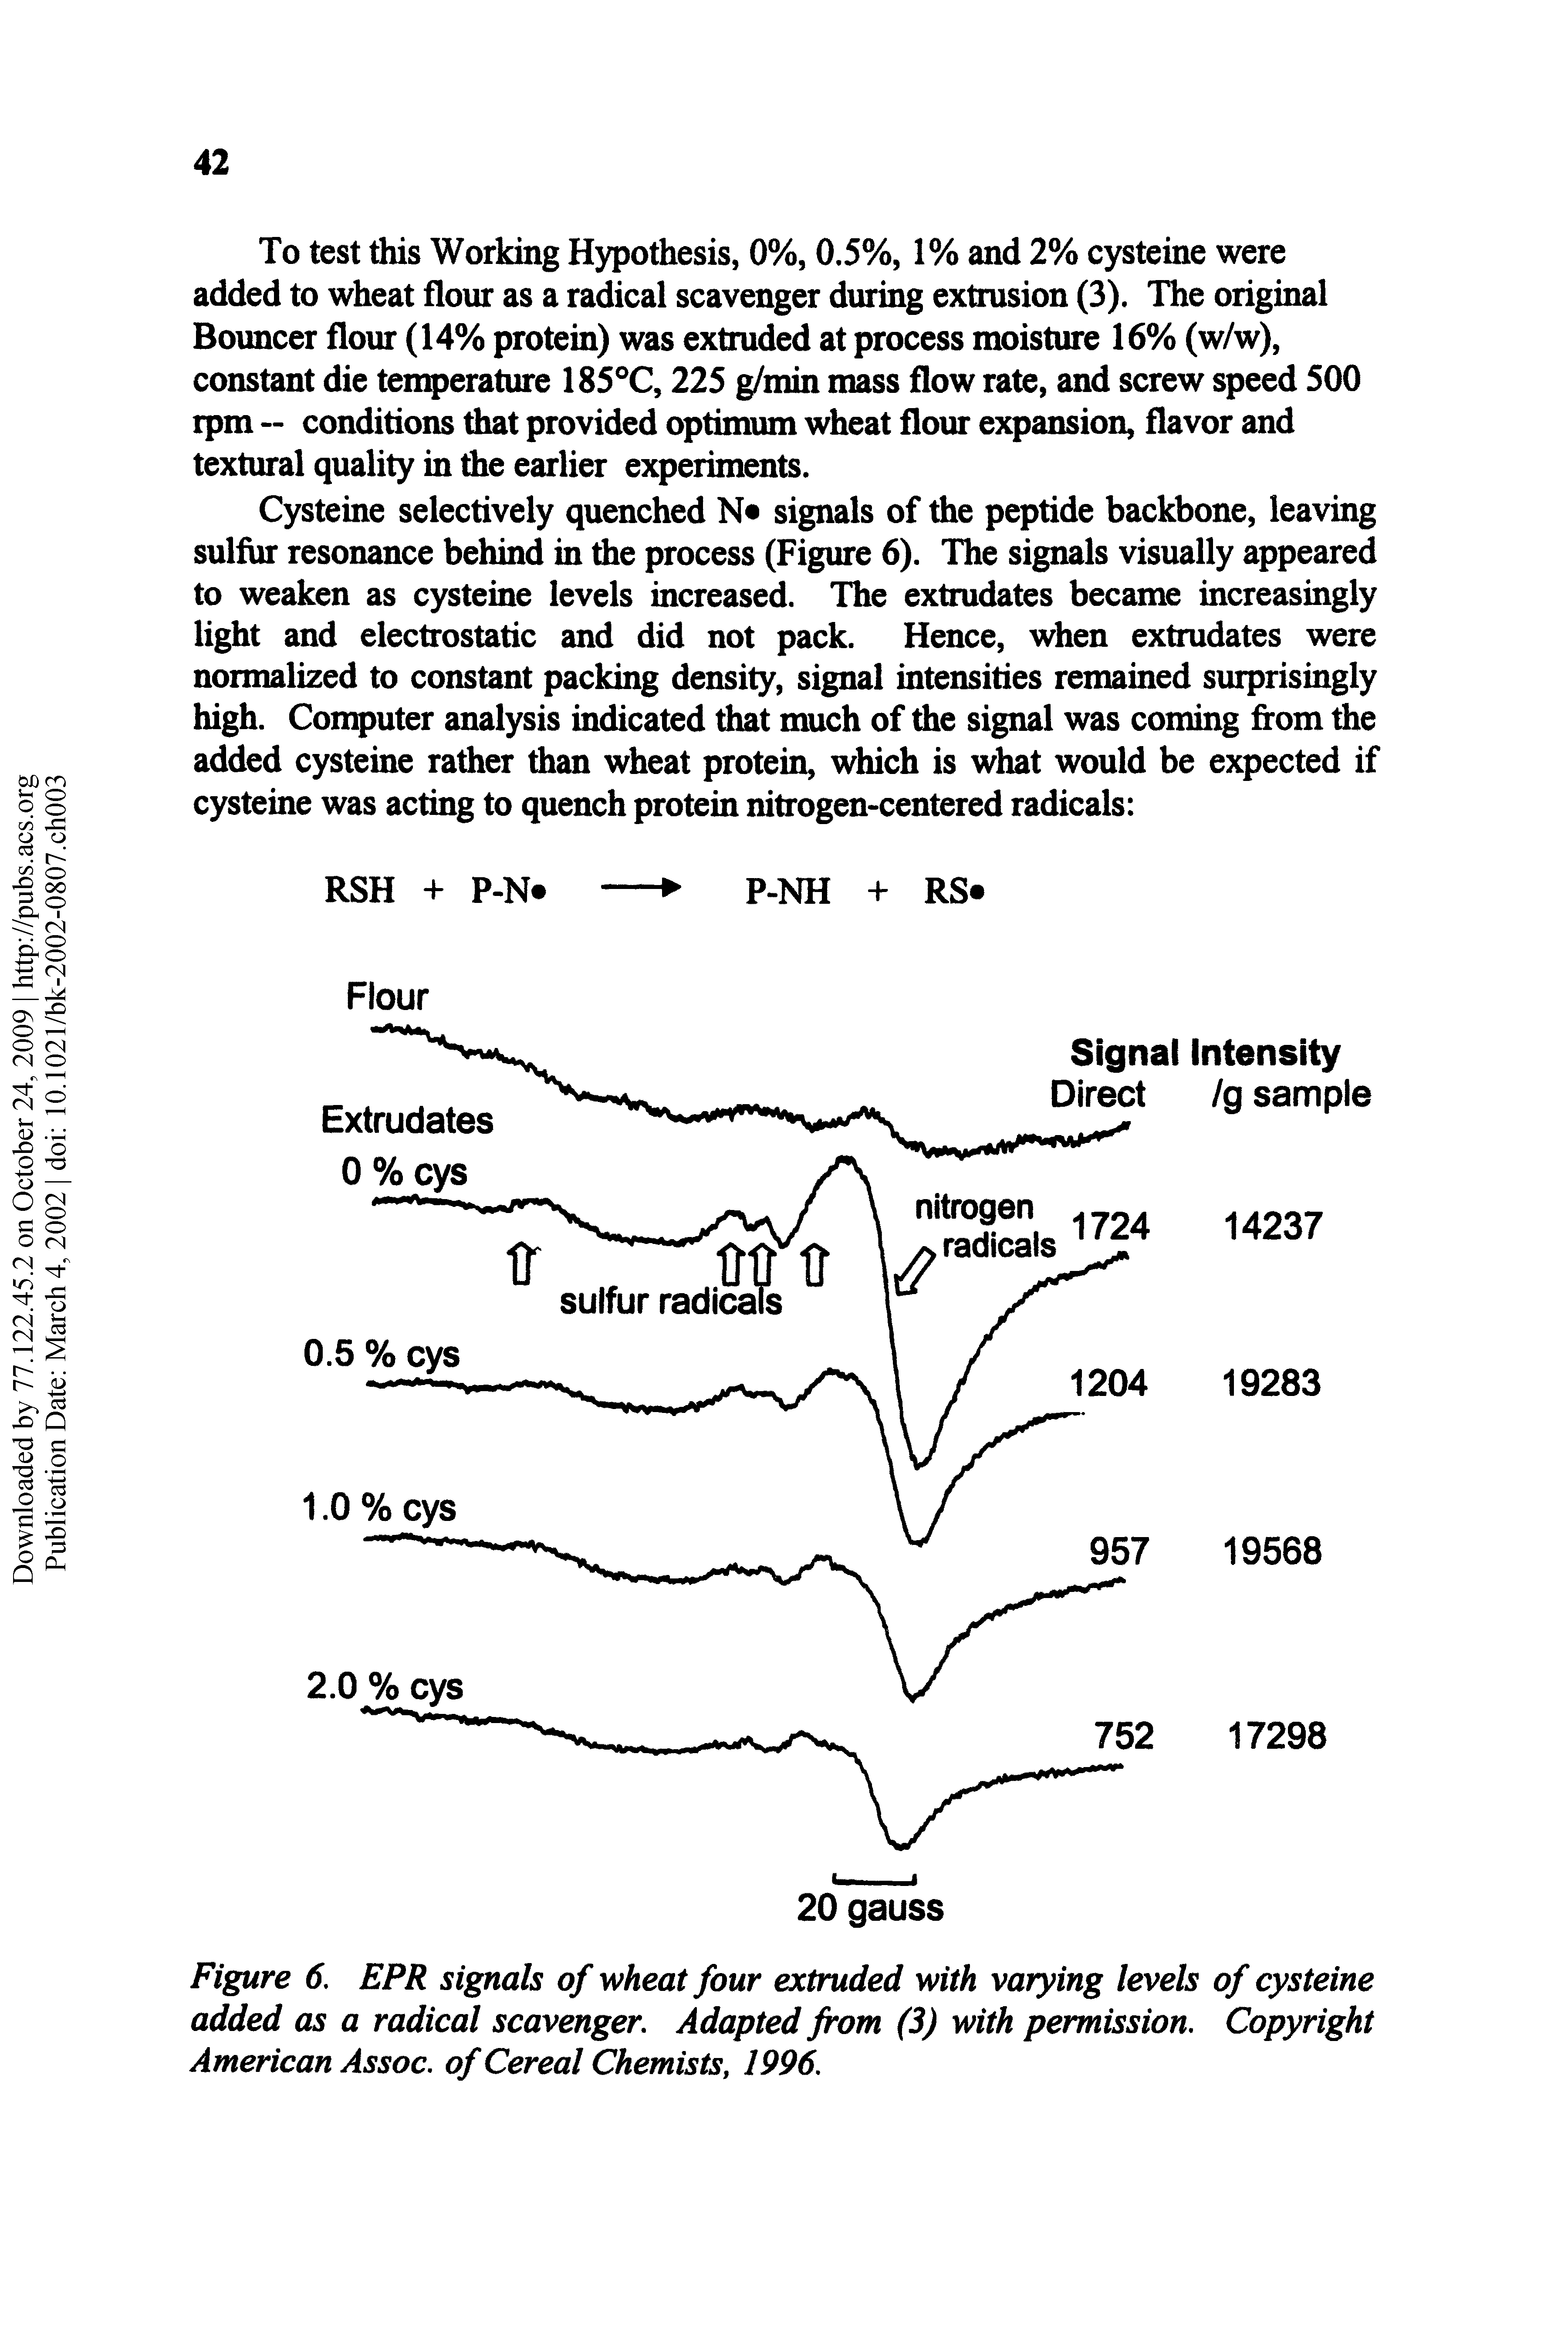 Figure 6. EPR signals of wheat four extruded with varying levels of cysteine added as a radical scavenger. Adapted from (3) with permission. Copyright American Assoc, of Cereal Chemists, 1996.